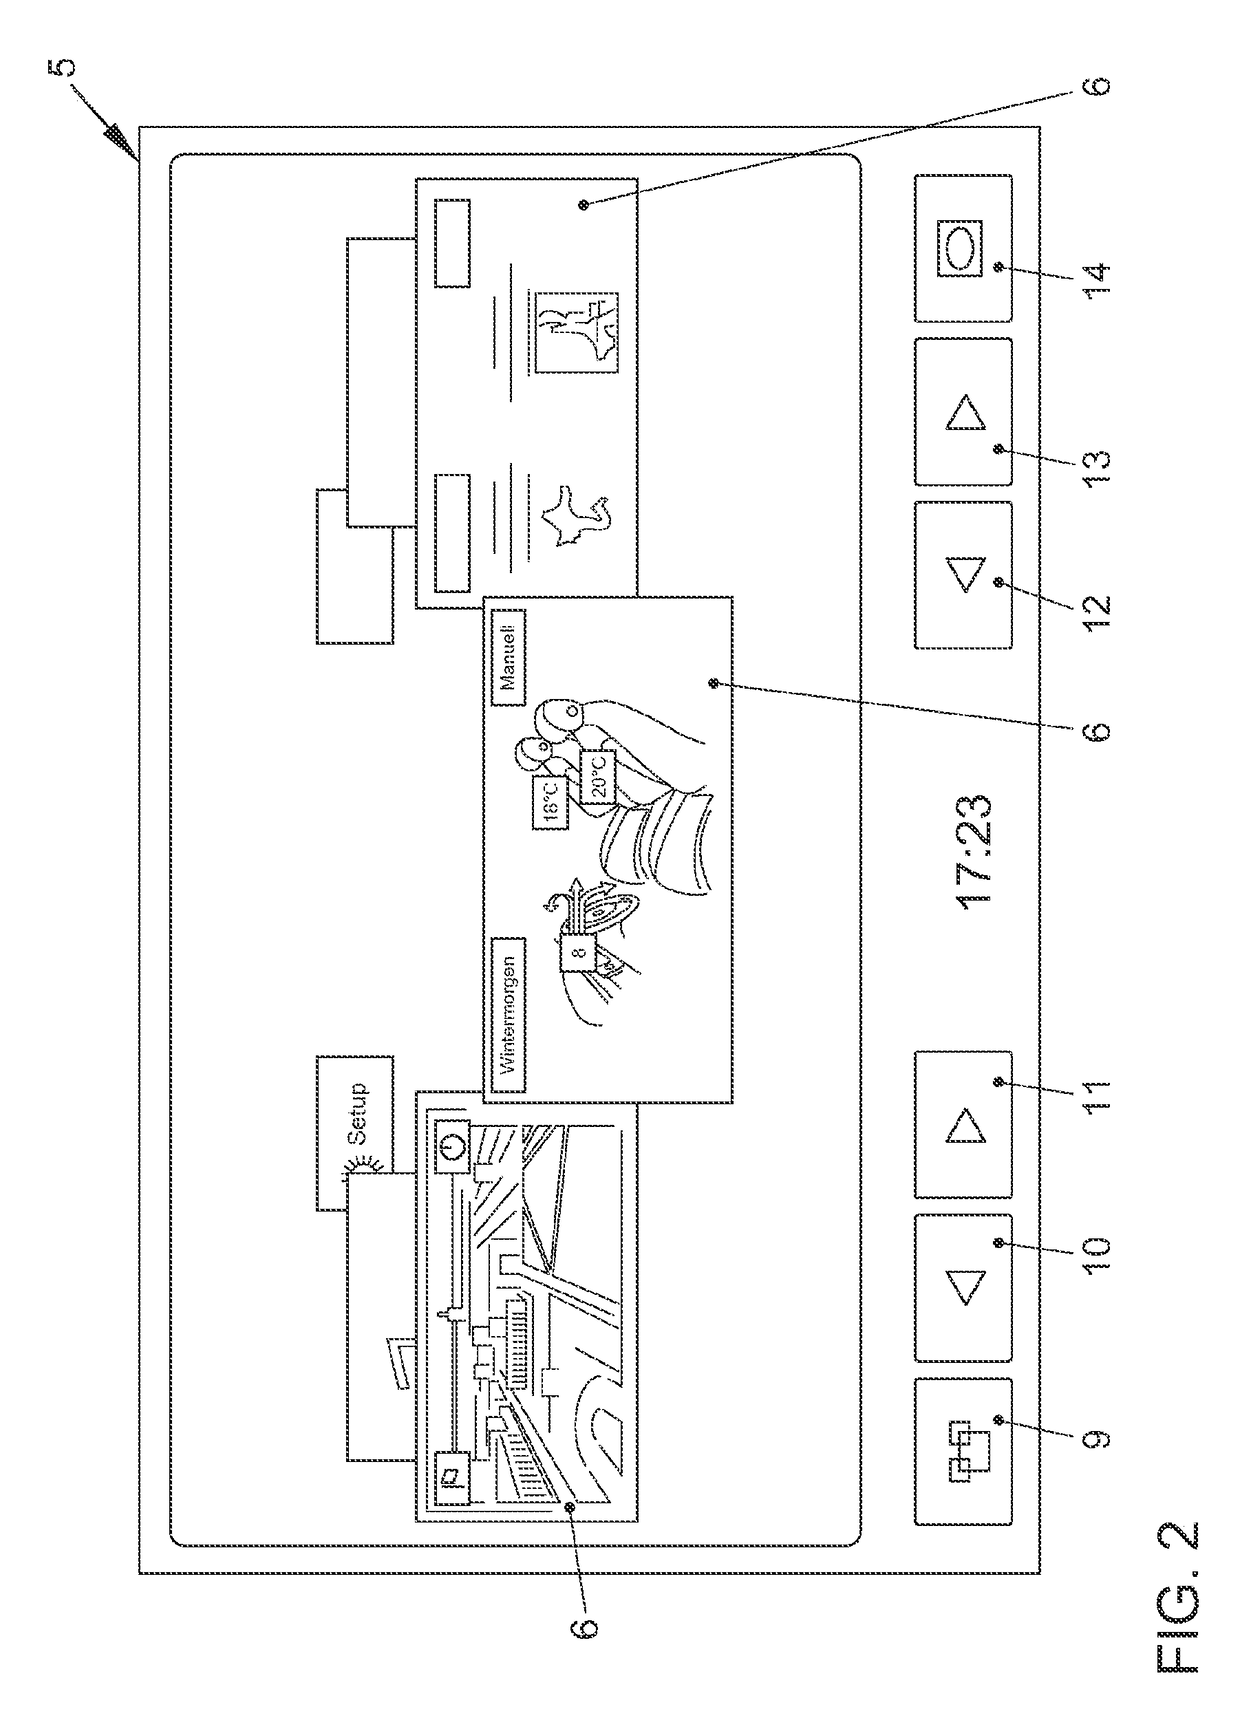 Method and device for displaying information arranged in lists